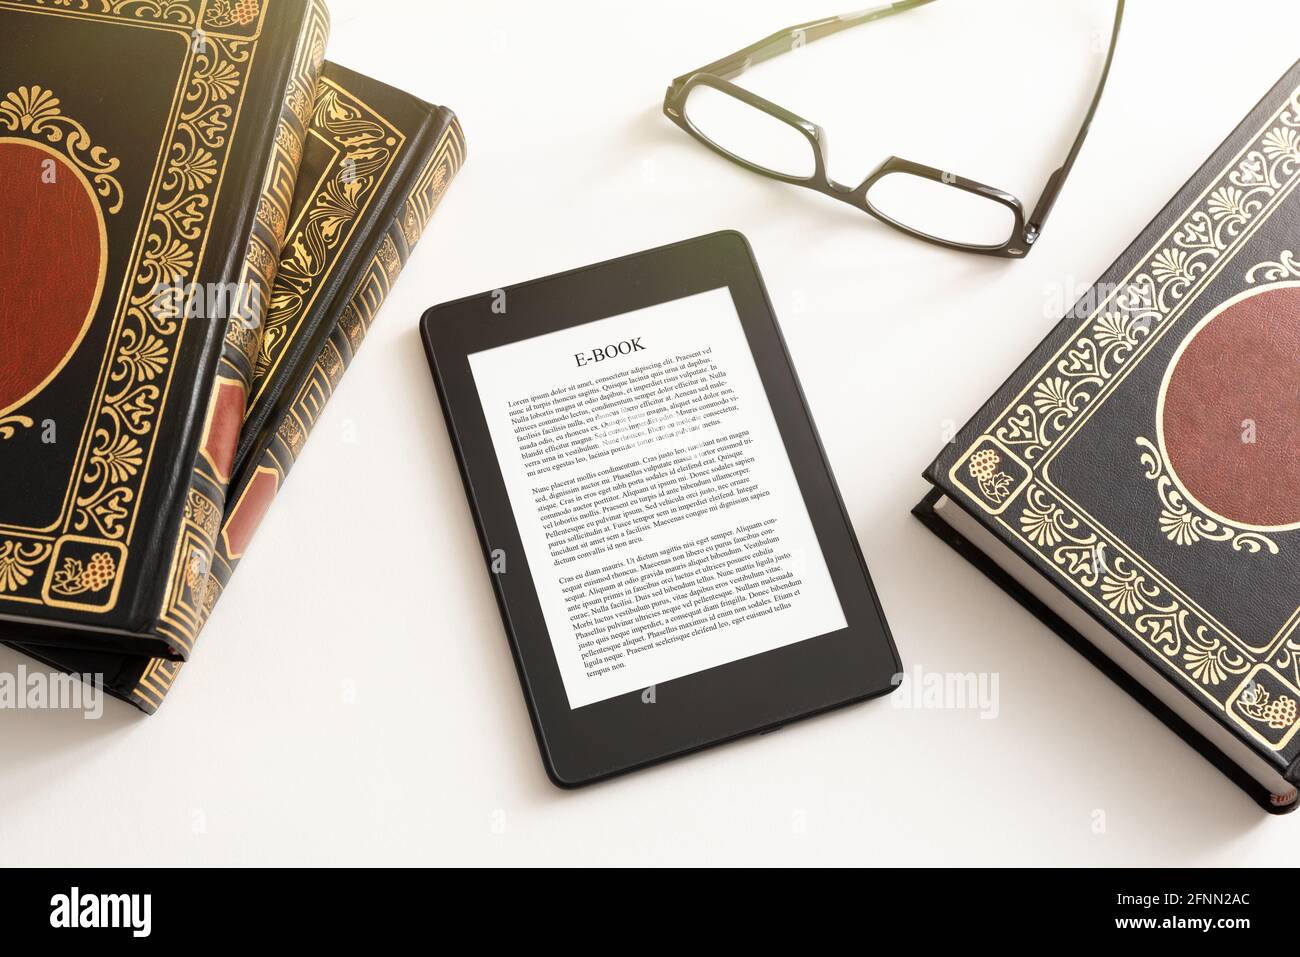 E-book reader with traditional books composition. Book reading with e-book device concept Stock Photo